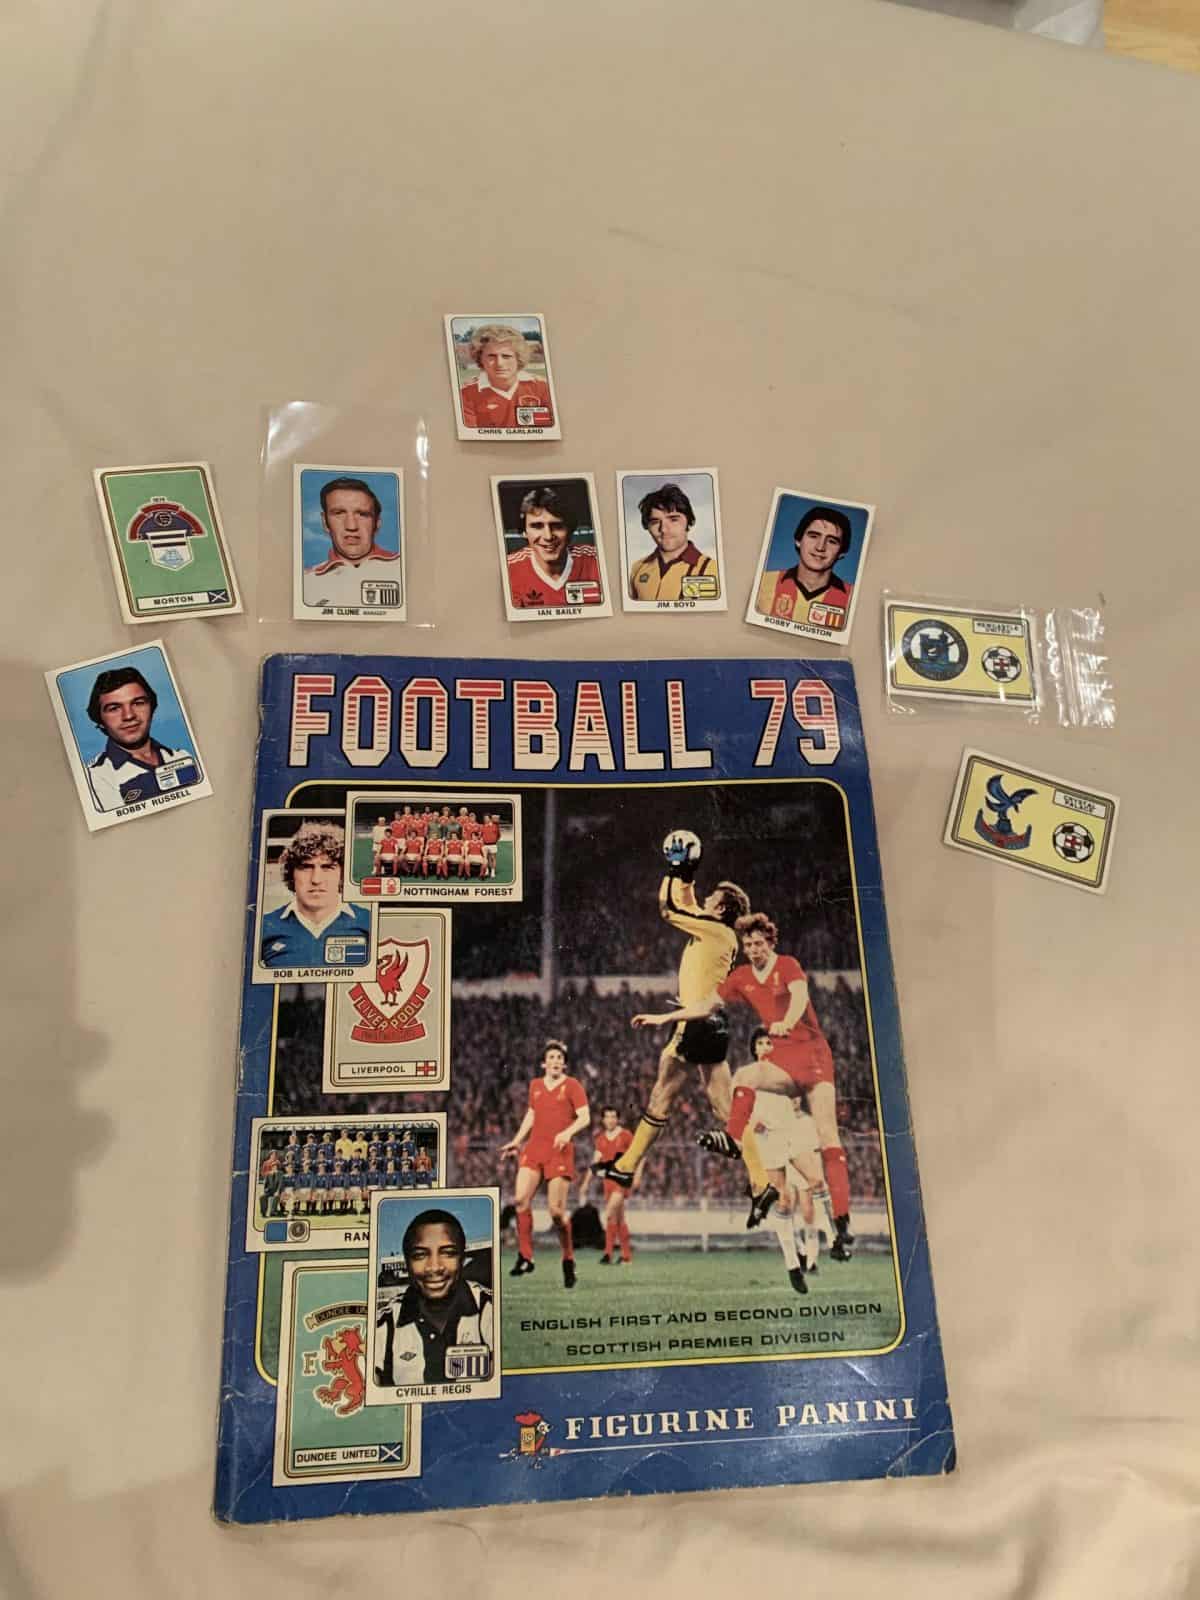 The 1979 sticker book with the stickers found by Laurensss. See SWNS story SWLEstickers; A football mad dad has finally completed his Panini sticker book with help from his thoughtful daughter - 41 years after he first started it. John Moore, 52, was only 12 when he started collecting cards in the school playground and very nearly finished the annual. The Spurs fan had to collect 594 stickers of football players from the English first and second division and Scottish premier division from 1979 - but was 11 short. John, from Chigwell, Essex had forgotten about the project until he was looking through his old football memorabilia in the loft to show his daughter last month. When sports journalist Lauren, 22, saw he had a few cards missing, she decided to help him fill the book during lockdown. It took Lauren a month to track down all the missing cards online and she had to buy other people's cards who had been stuck down in their own books. Eventually she got them all together and surprised her dad with the sweet gesture last Saturday (25 April).